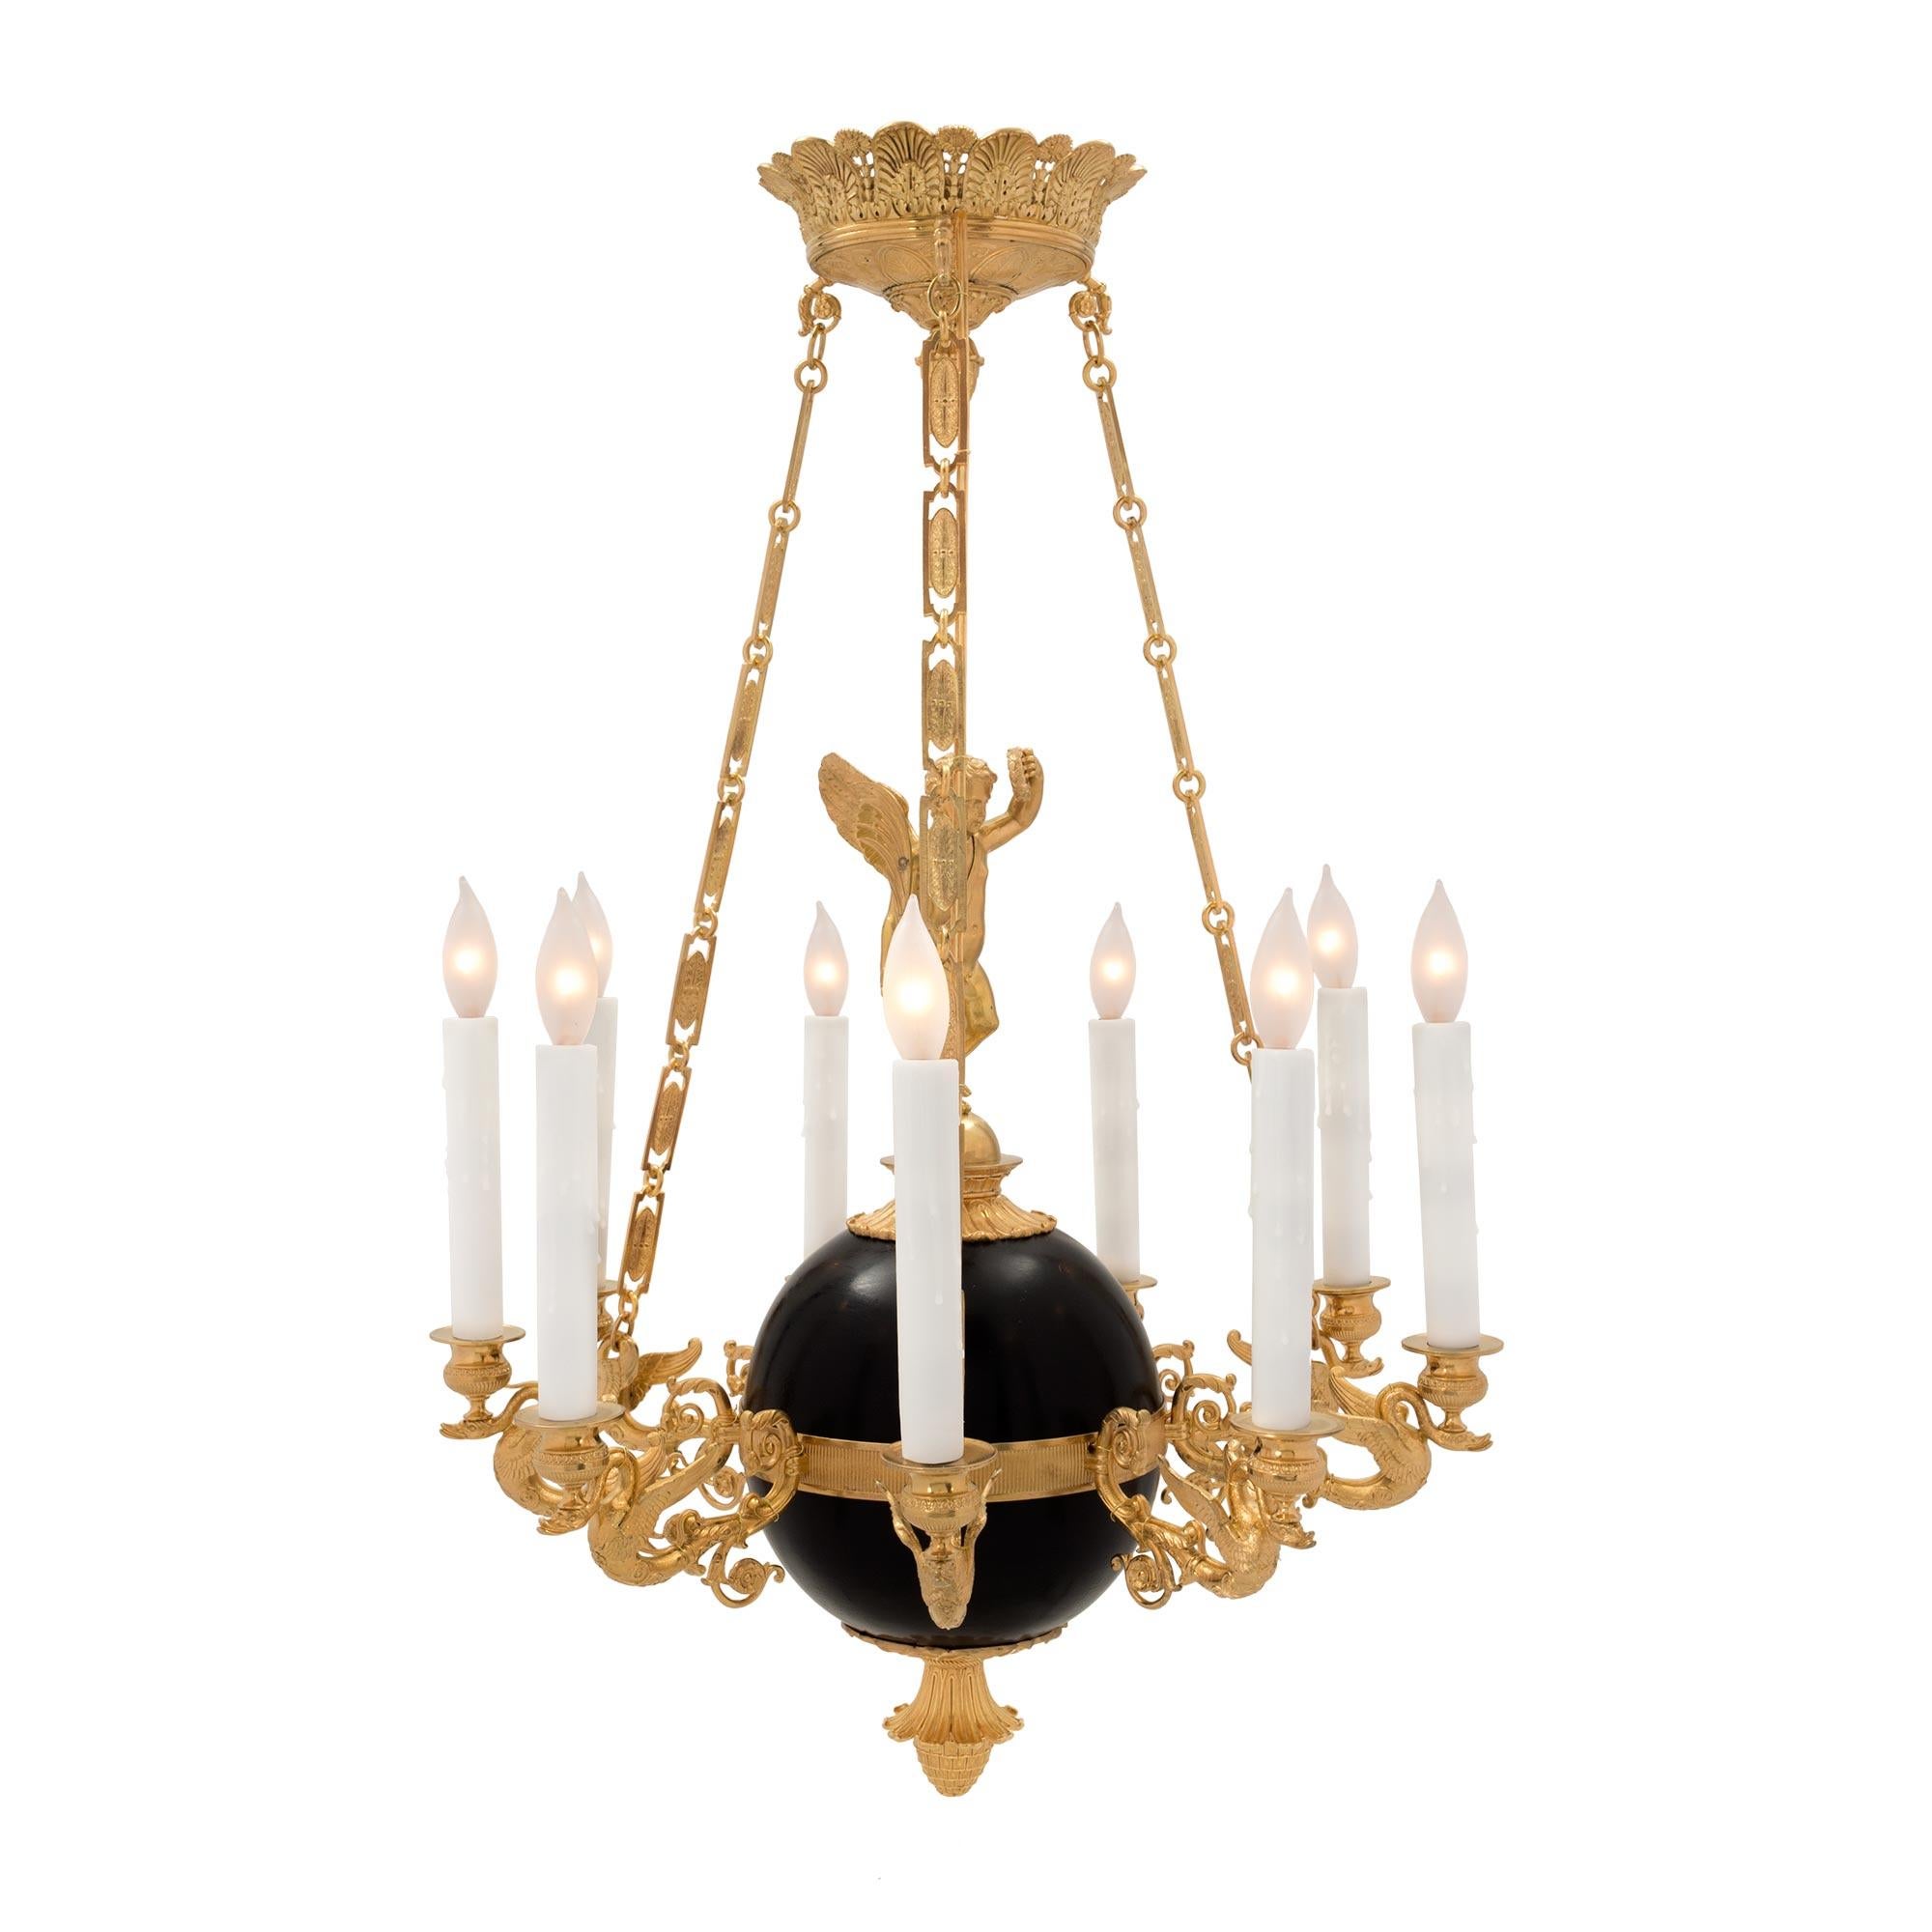 A superb French 19th century Neo-Classical st. ormolu and patinated bronze nine arm chandelier. The chandelier is centered by a richly chased bottom acorn finial below the central patinated bronze ball. Standing on the ball is a charming and